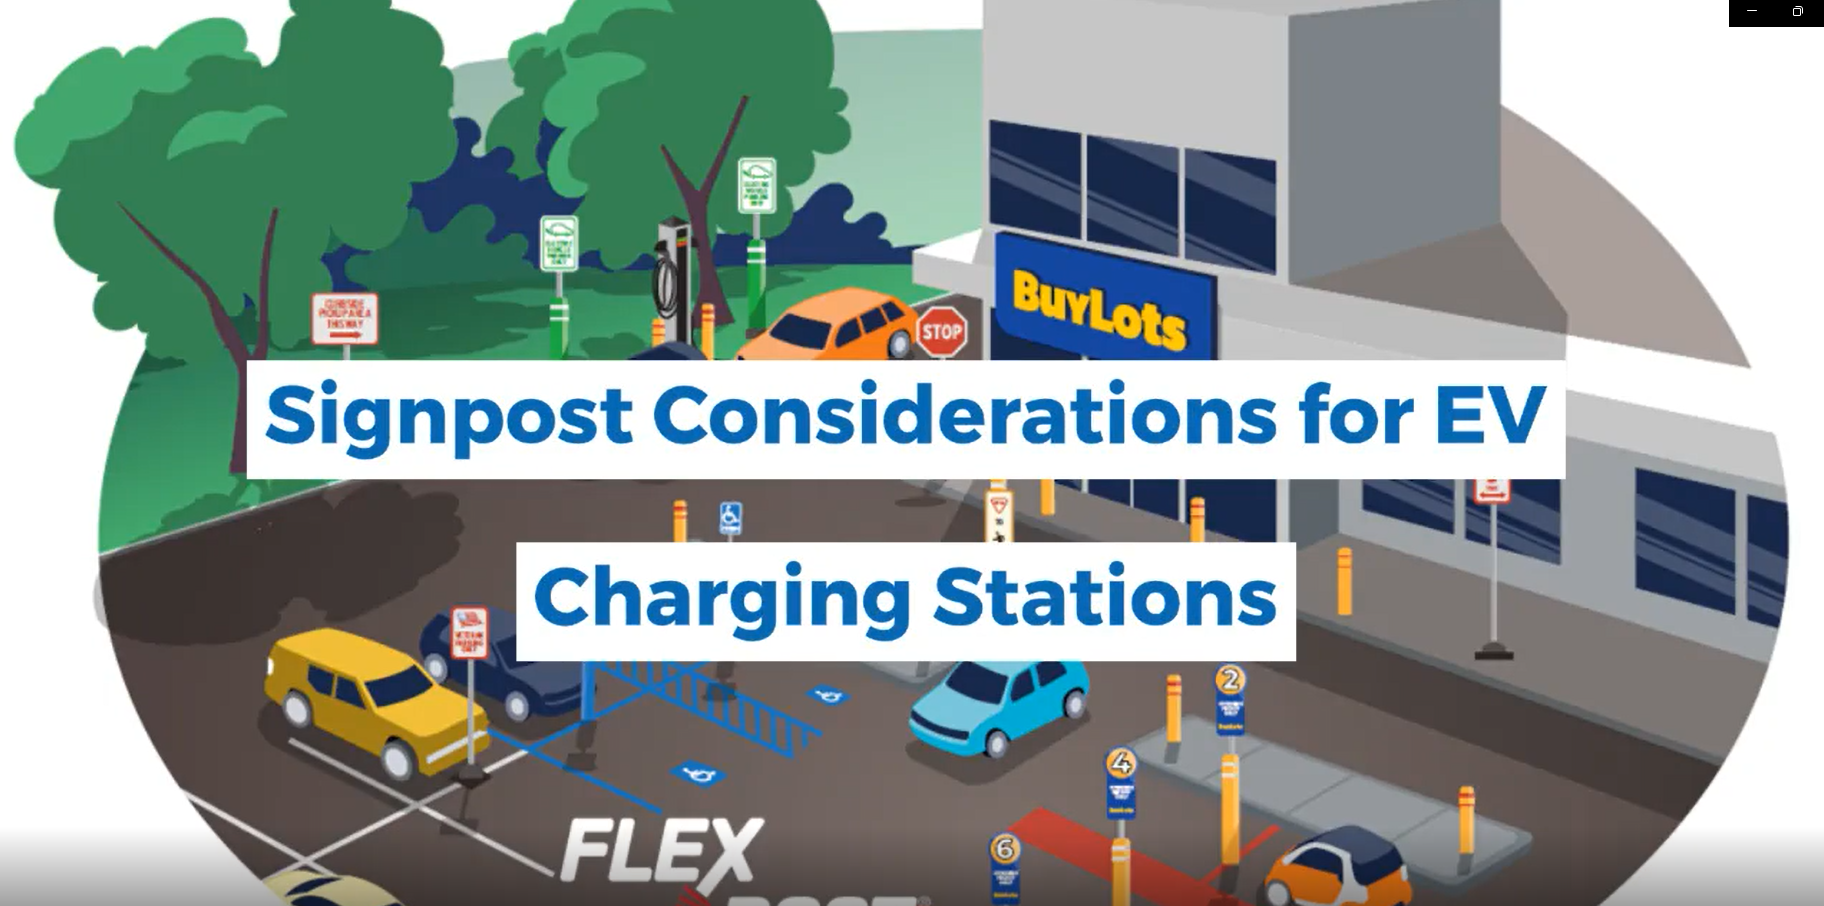 FlexPost - Signpost Considerations for EV Charging Stations